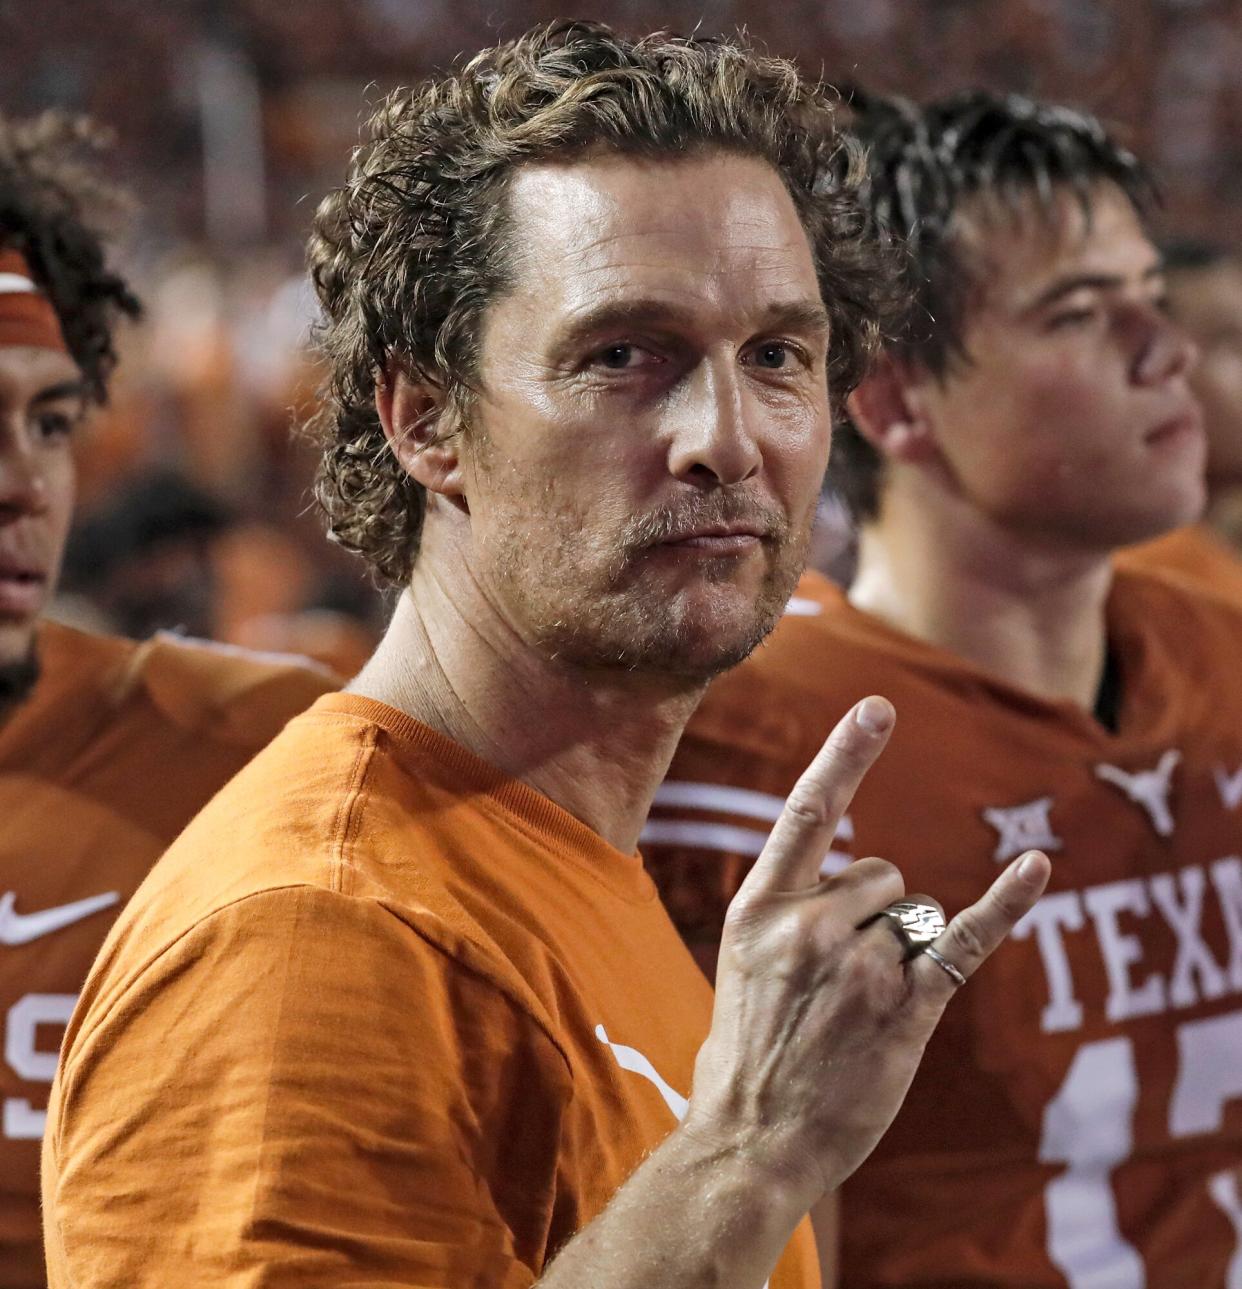 Actor and Texas fan Matthew McConaughey stands on the sideline during the game between the Texas Longhorns and the USC Trojans at Darrell K Royal-Texas Memorial Stadium on September 15, 2018 in Austin, Texas.